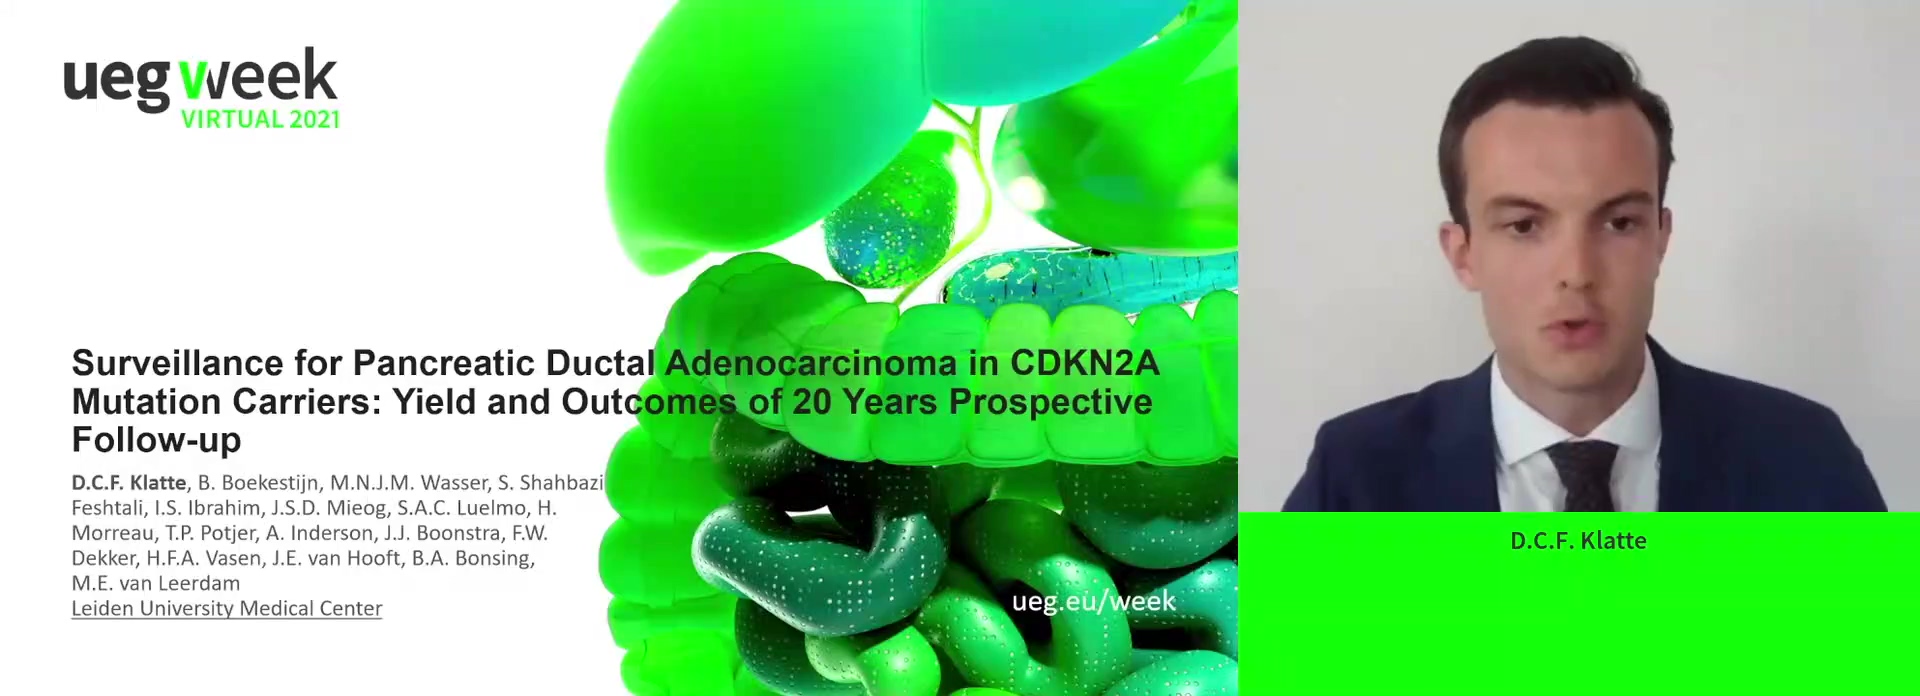 SURVEILLANCE FOR PANCREATIC DUCTAL ADENOCARCINOMA IN CDKN2A MUTATION CARRIERS: YIELD AND OUTCOMES OF 20 YEARS PROSPECTIVE FOLLOW-UP